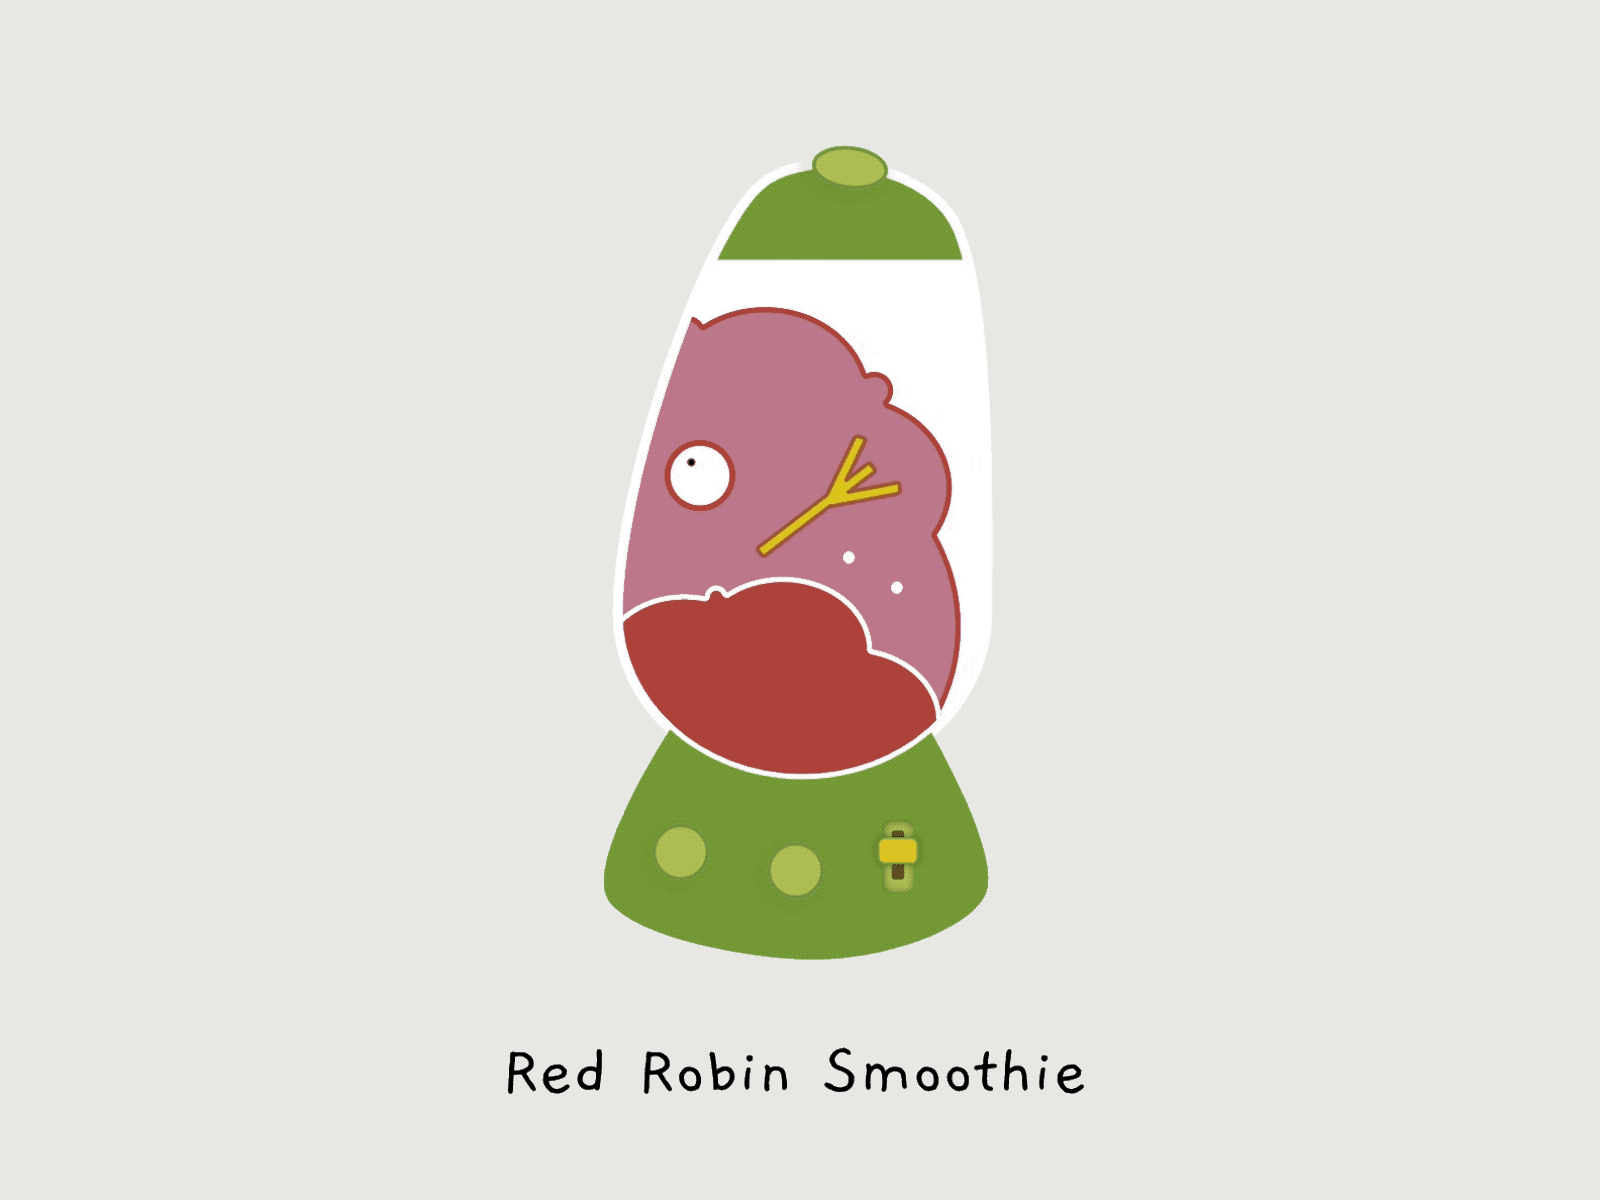 Red Robin Smoothie